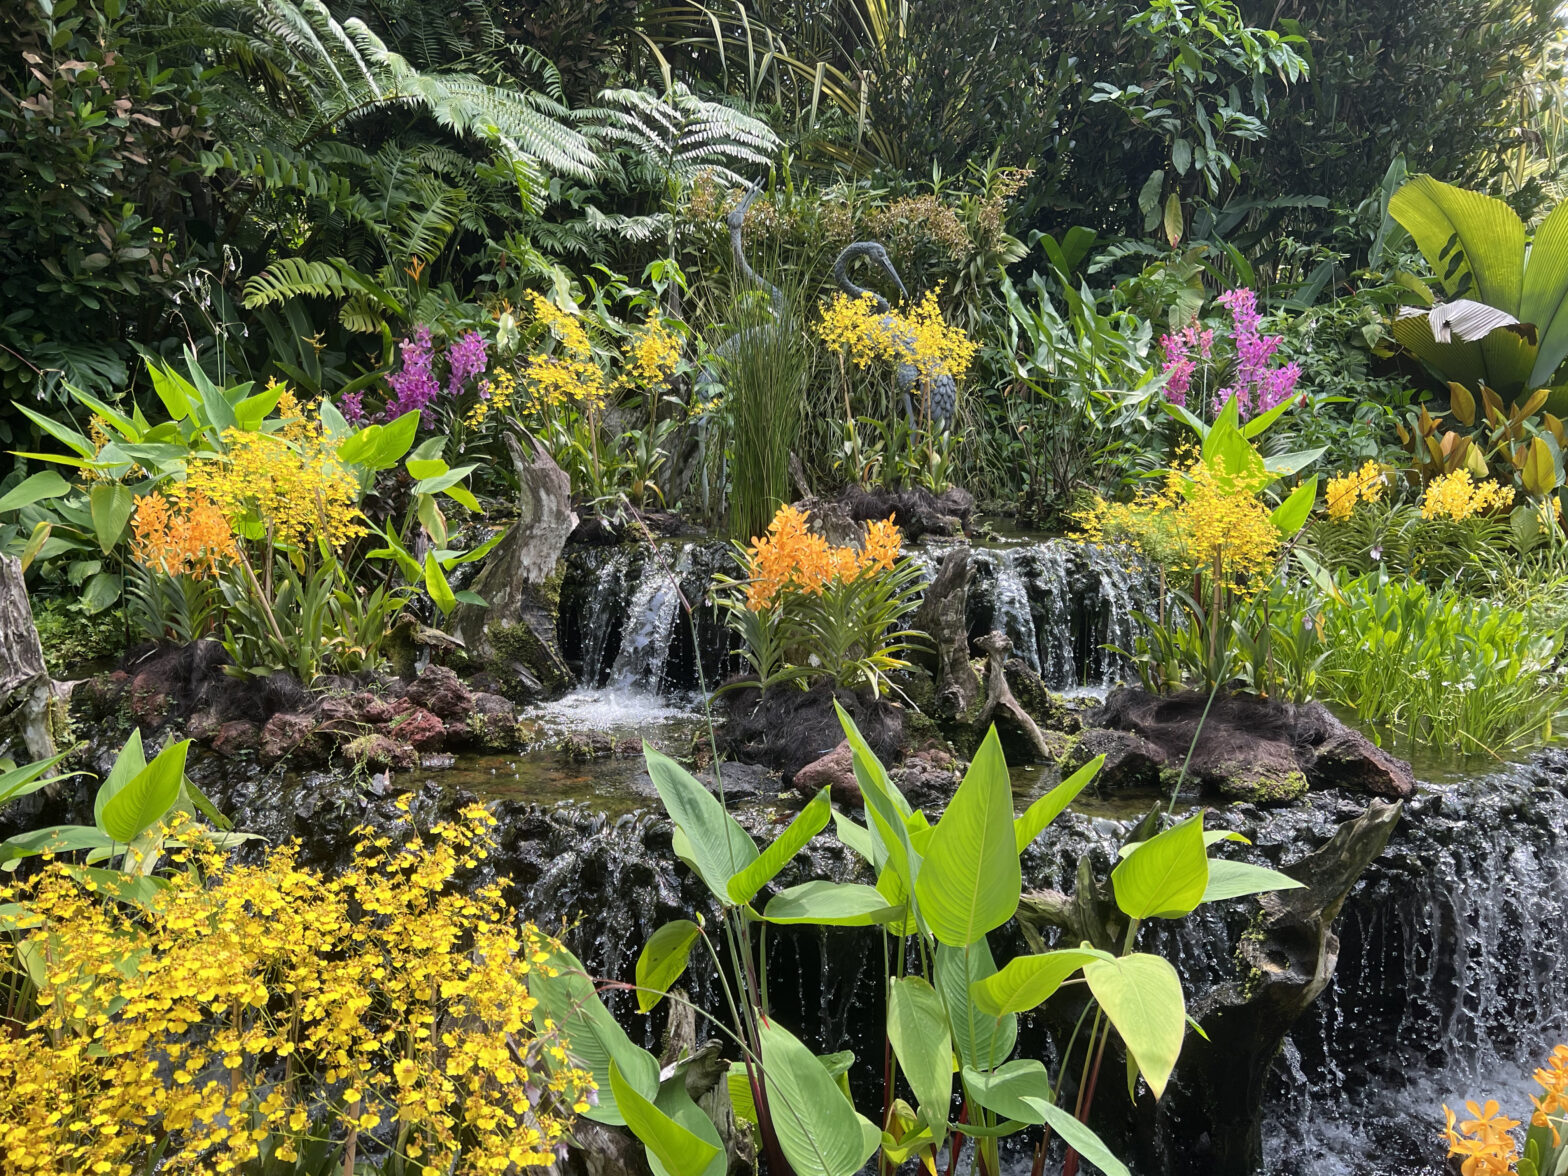 A hillside with a tiny waterfall, completely covered in orchid plants, blooming in yellow, orange, and purple